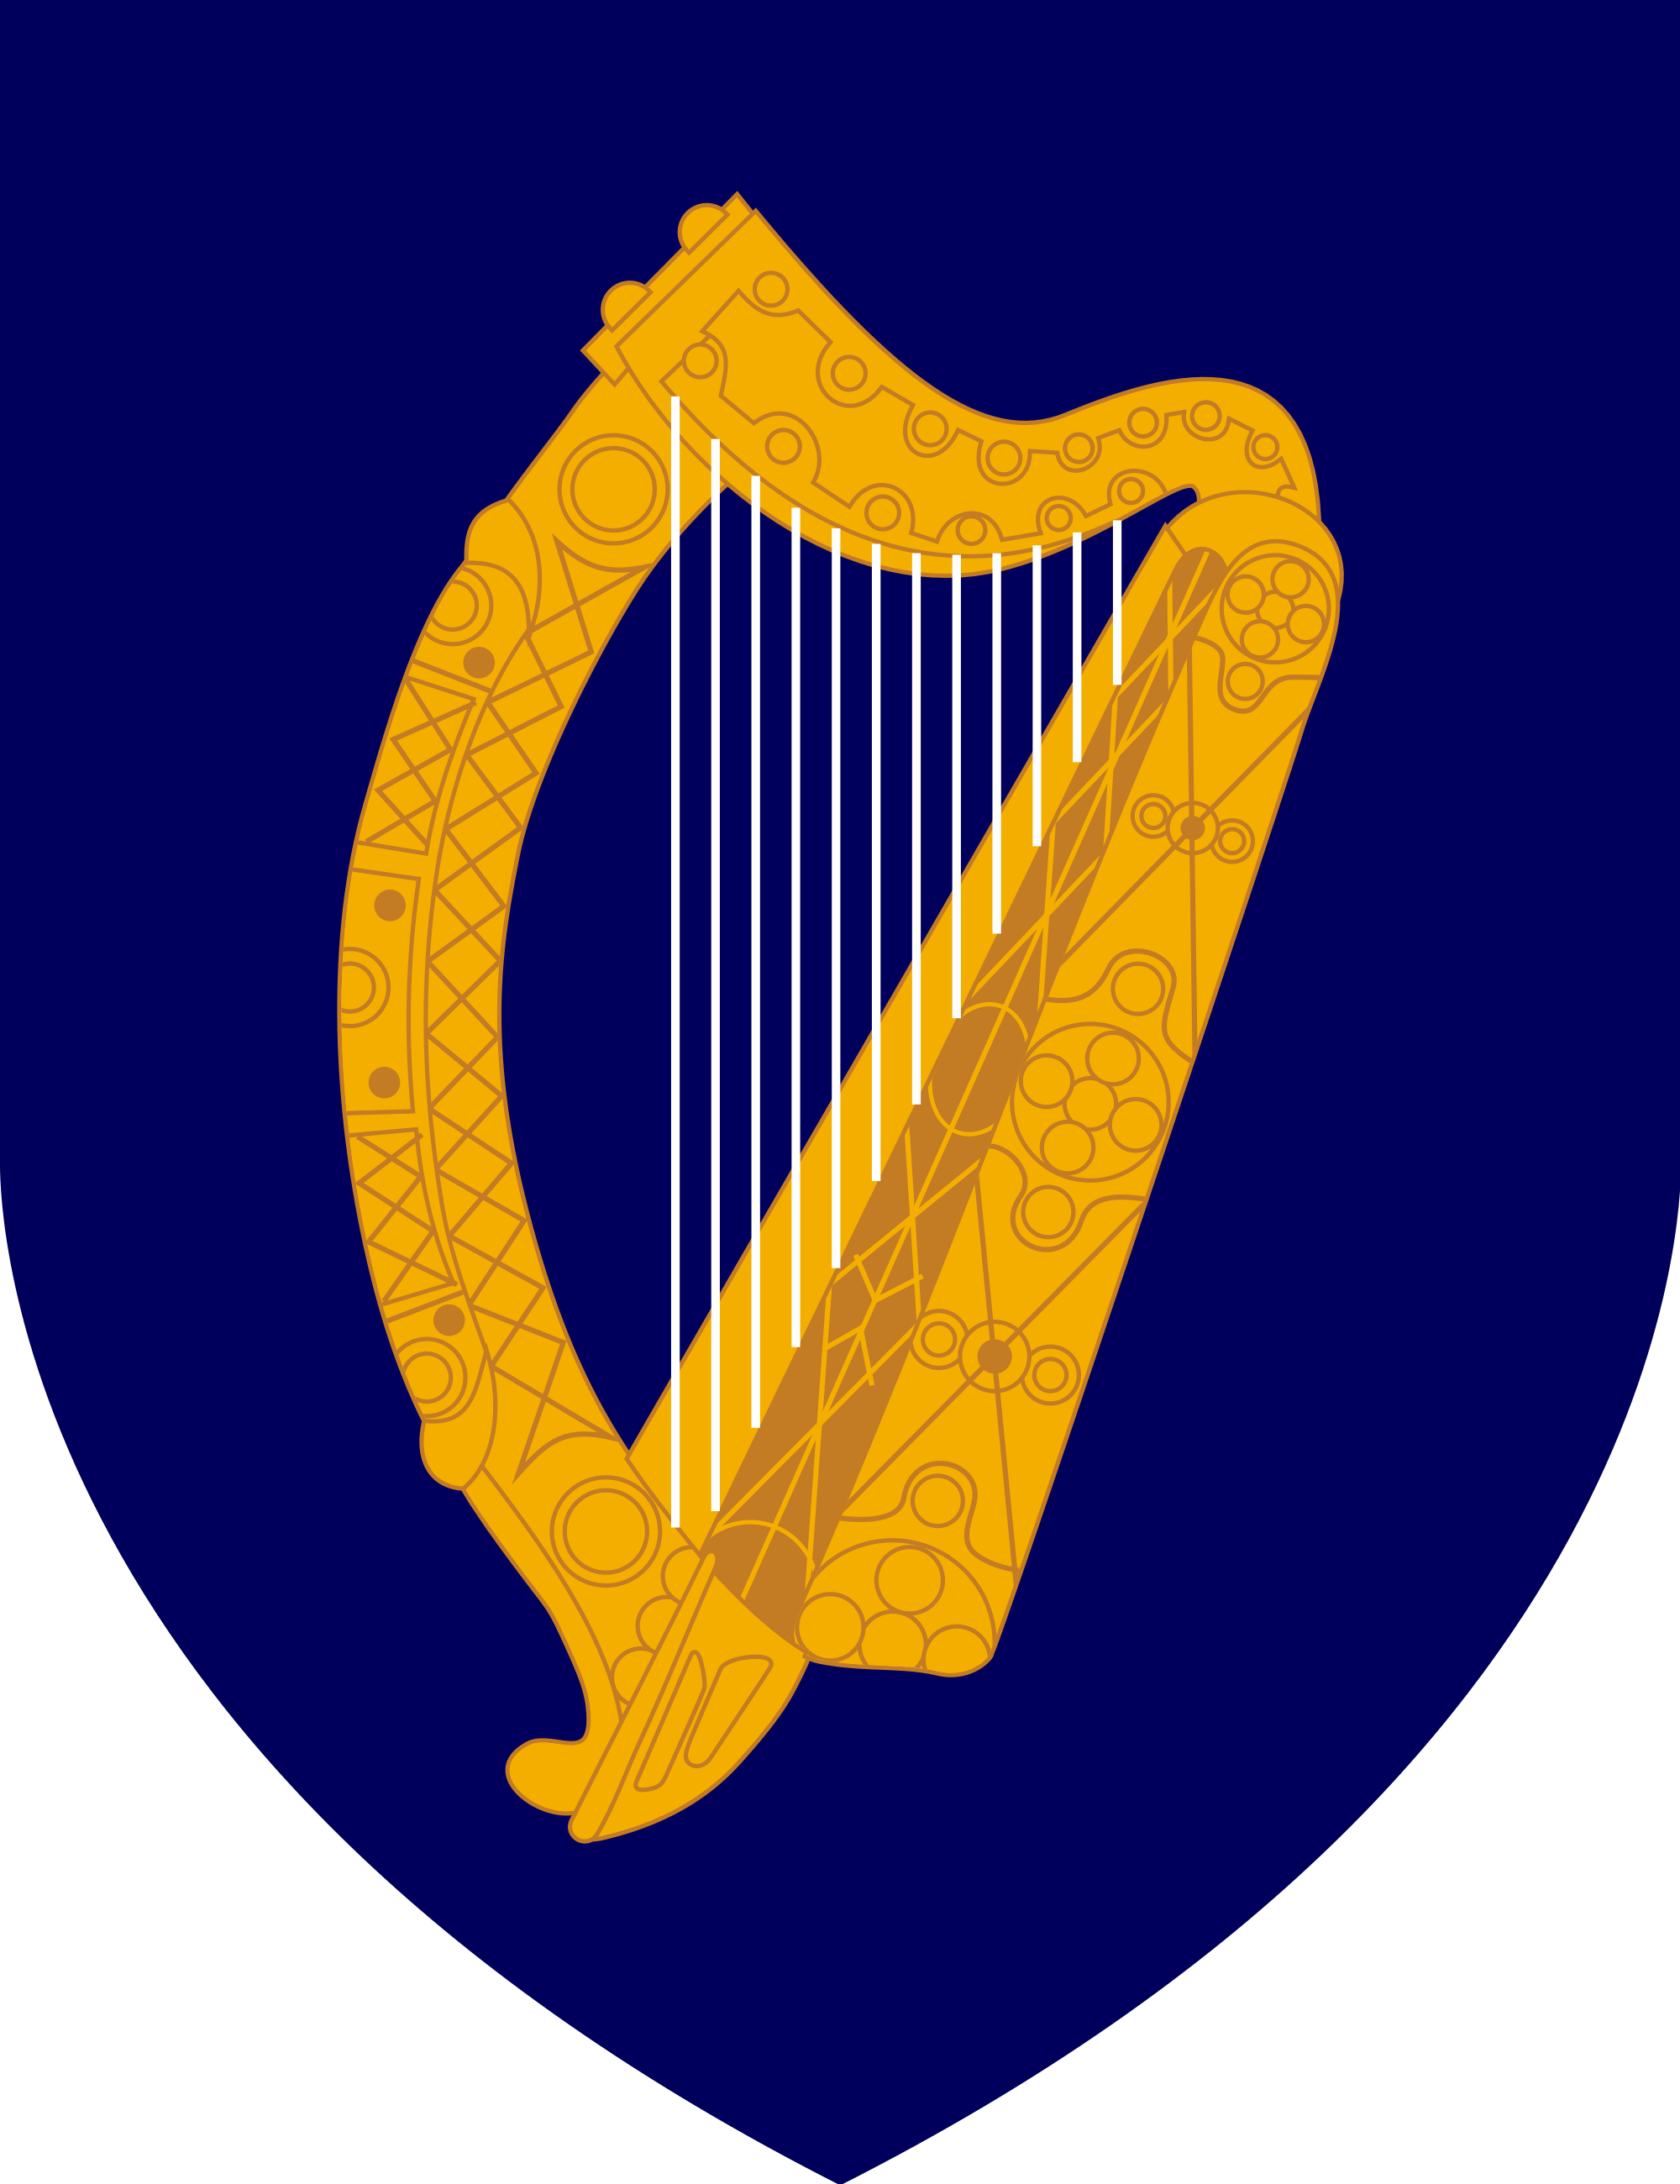 Coat of arms of Ireland